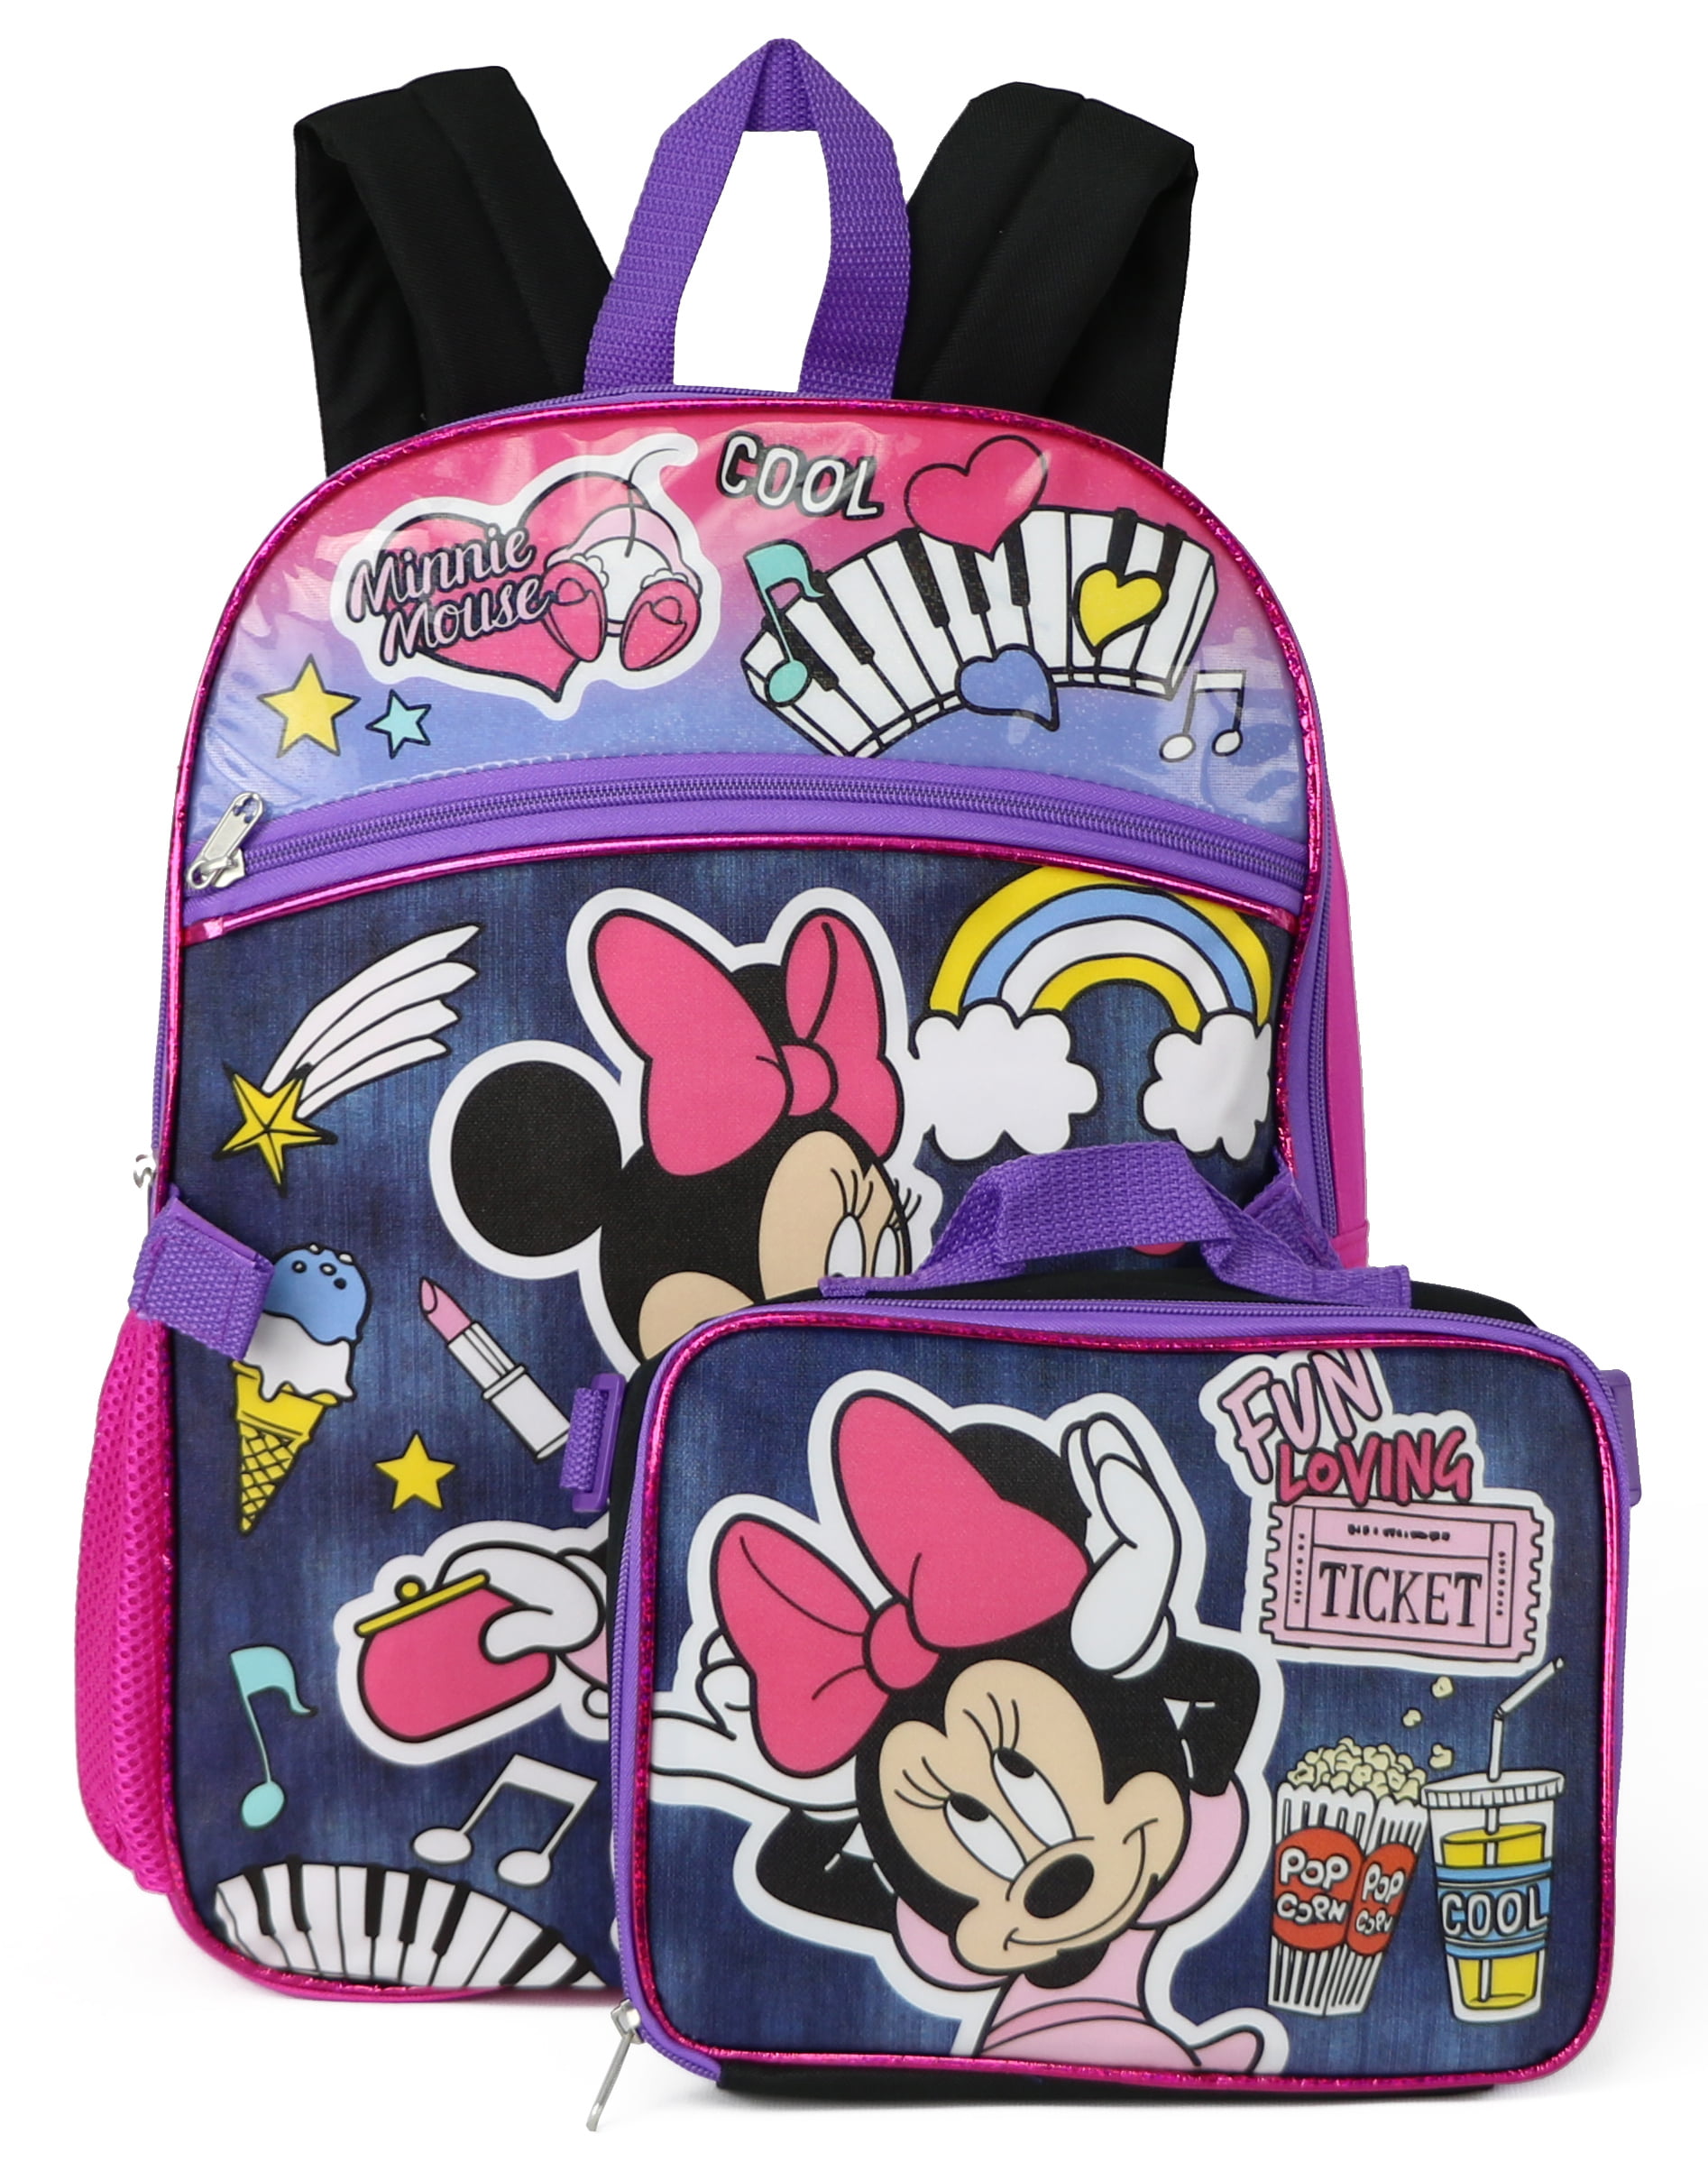 Disney Store Minnie Mouse Red Bow Denim Backpack & Lunch Tote Box School Bag Set 